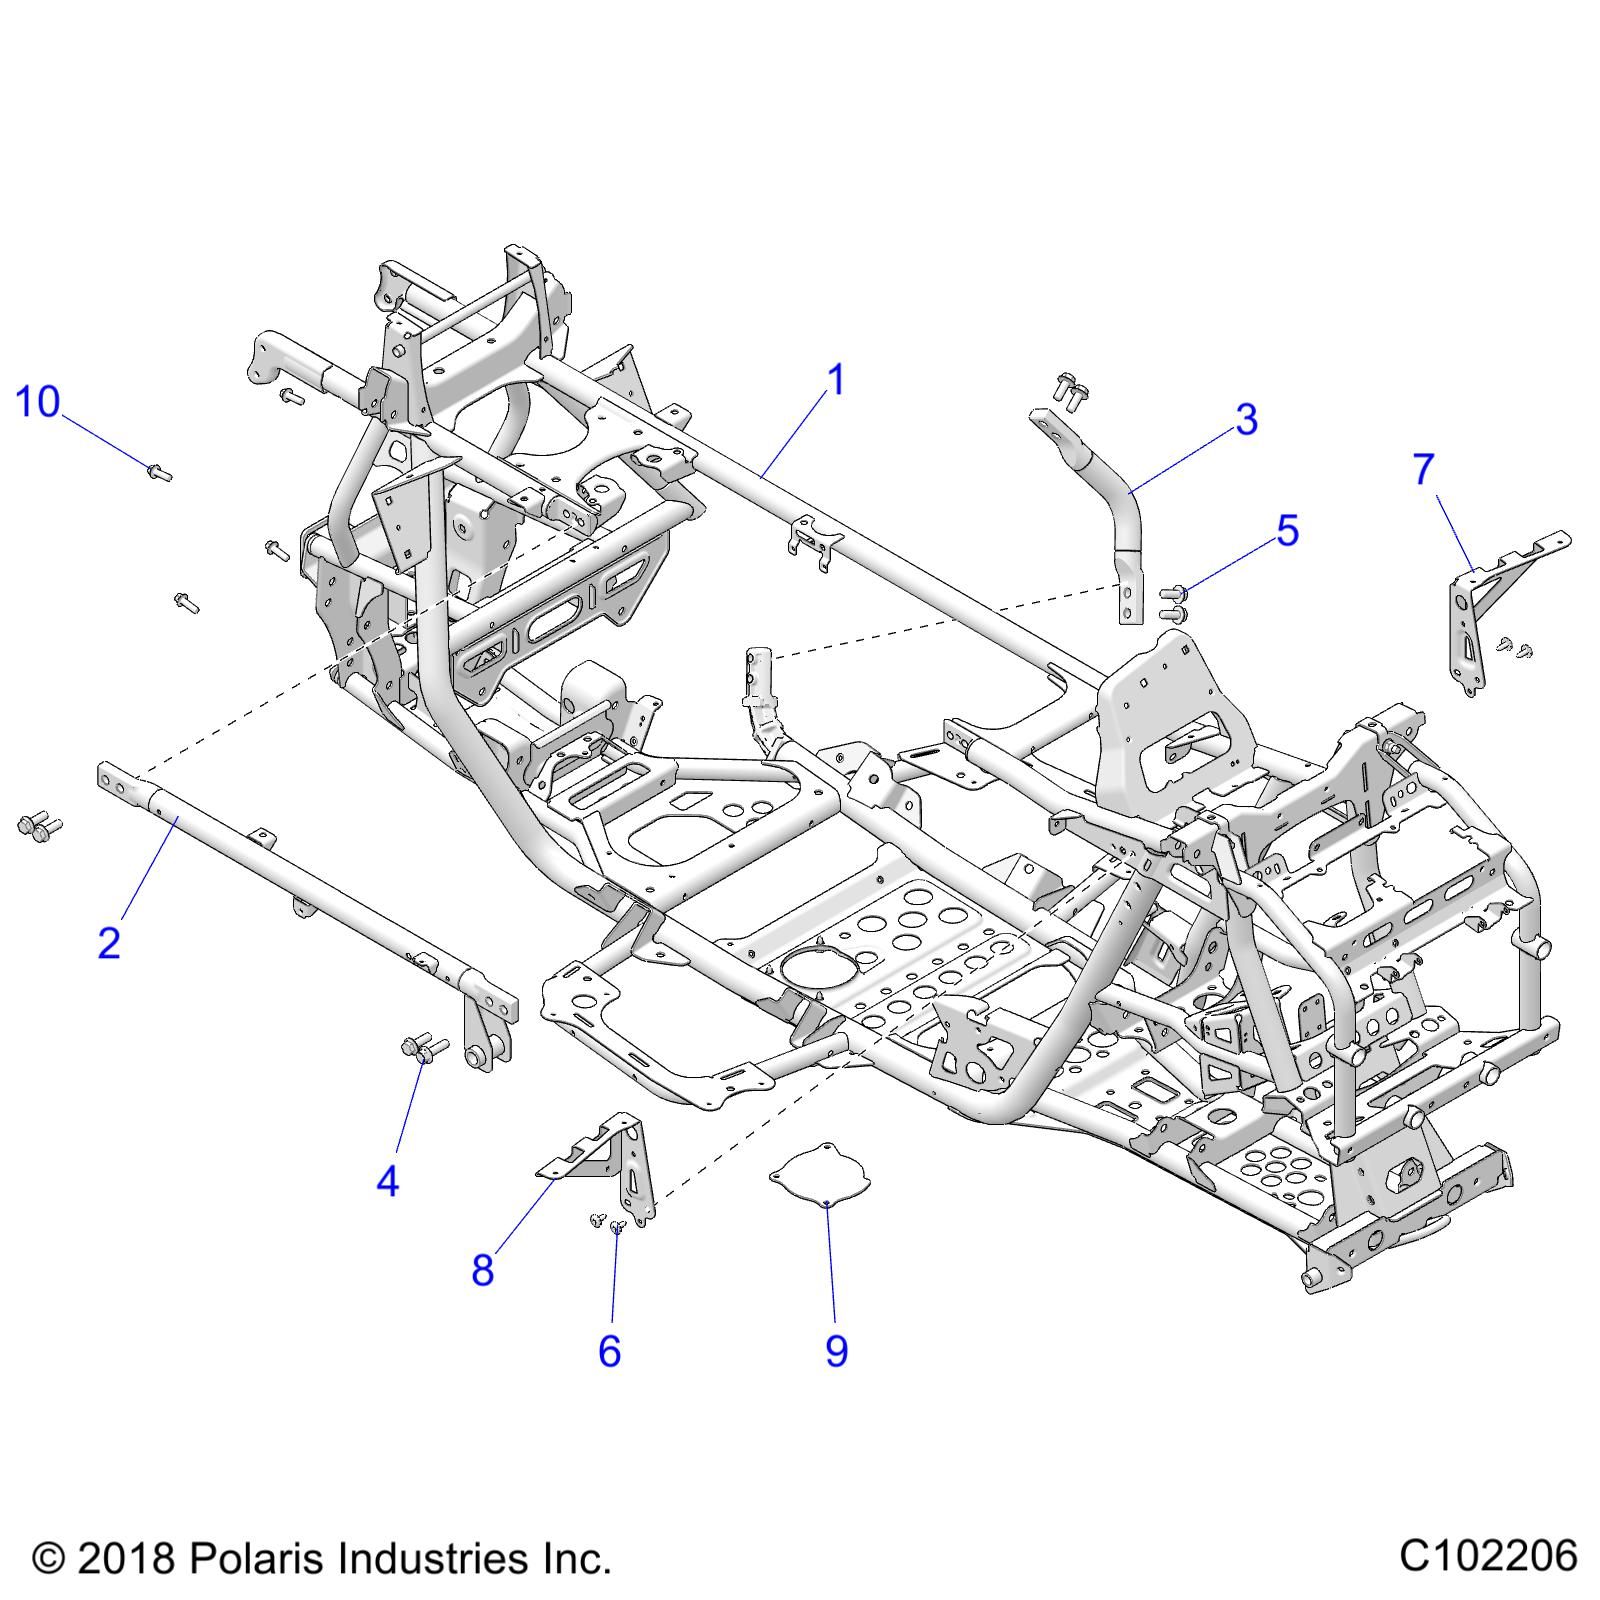 CHASSIS MAIN FRAME POUR SPORTSMAN XP 1000 55 EPS 3PC INTL R01 2022